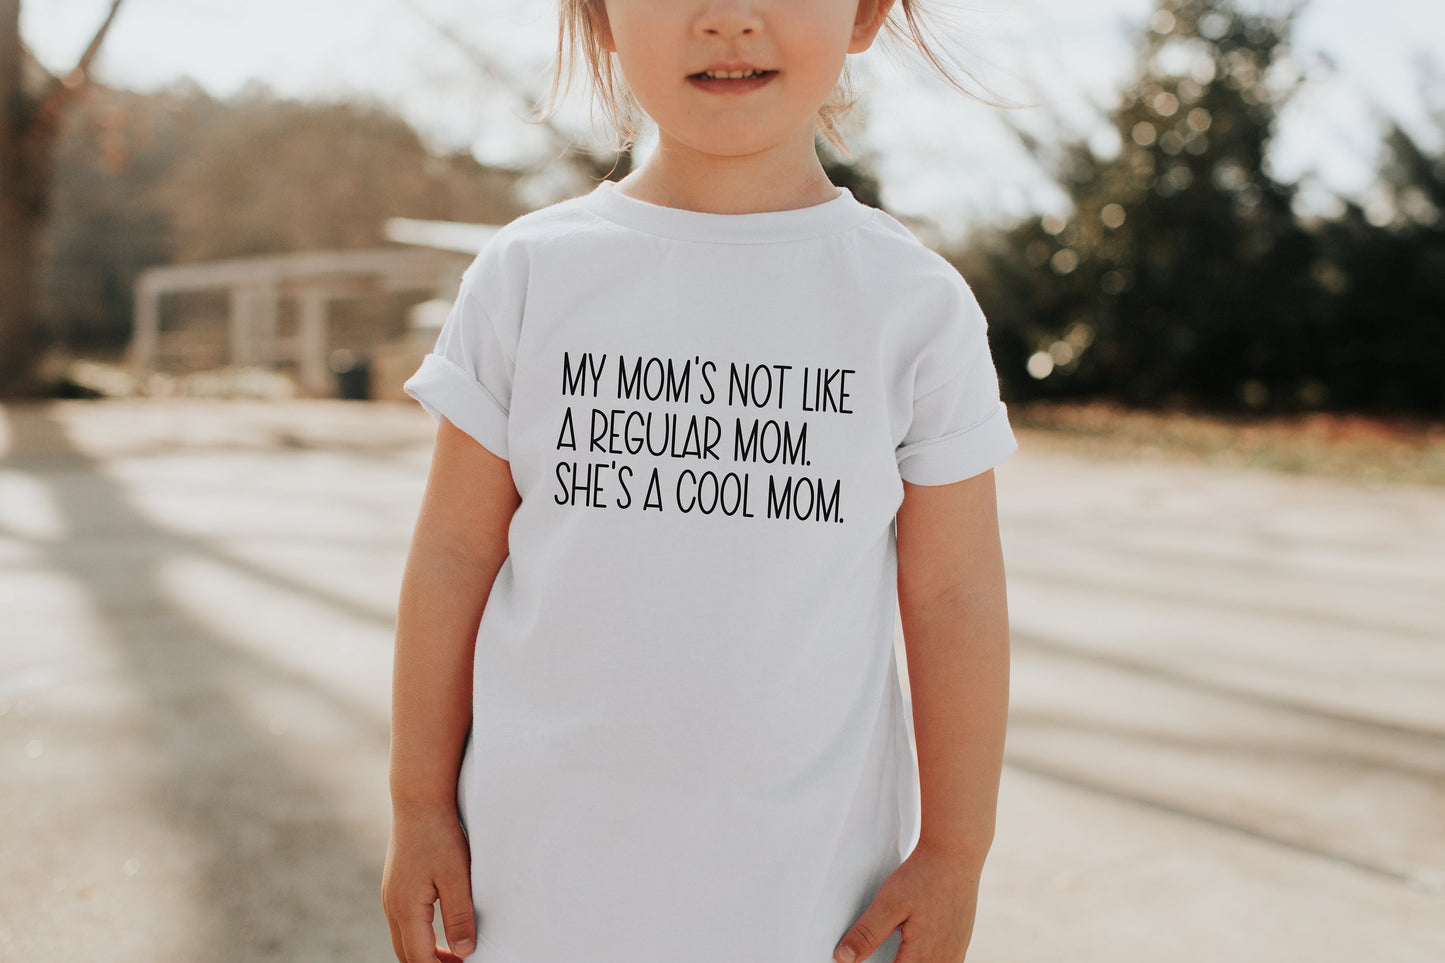 My Mom's Not Like a Regular Mom, She's a Cool Mom Shirt | Youth Toddler Kids Infant | Funny Mother's Day Gift | Girls Boys | Mean Movie